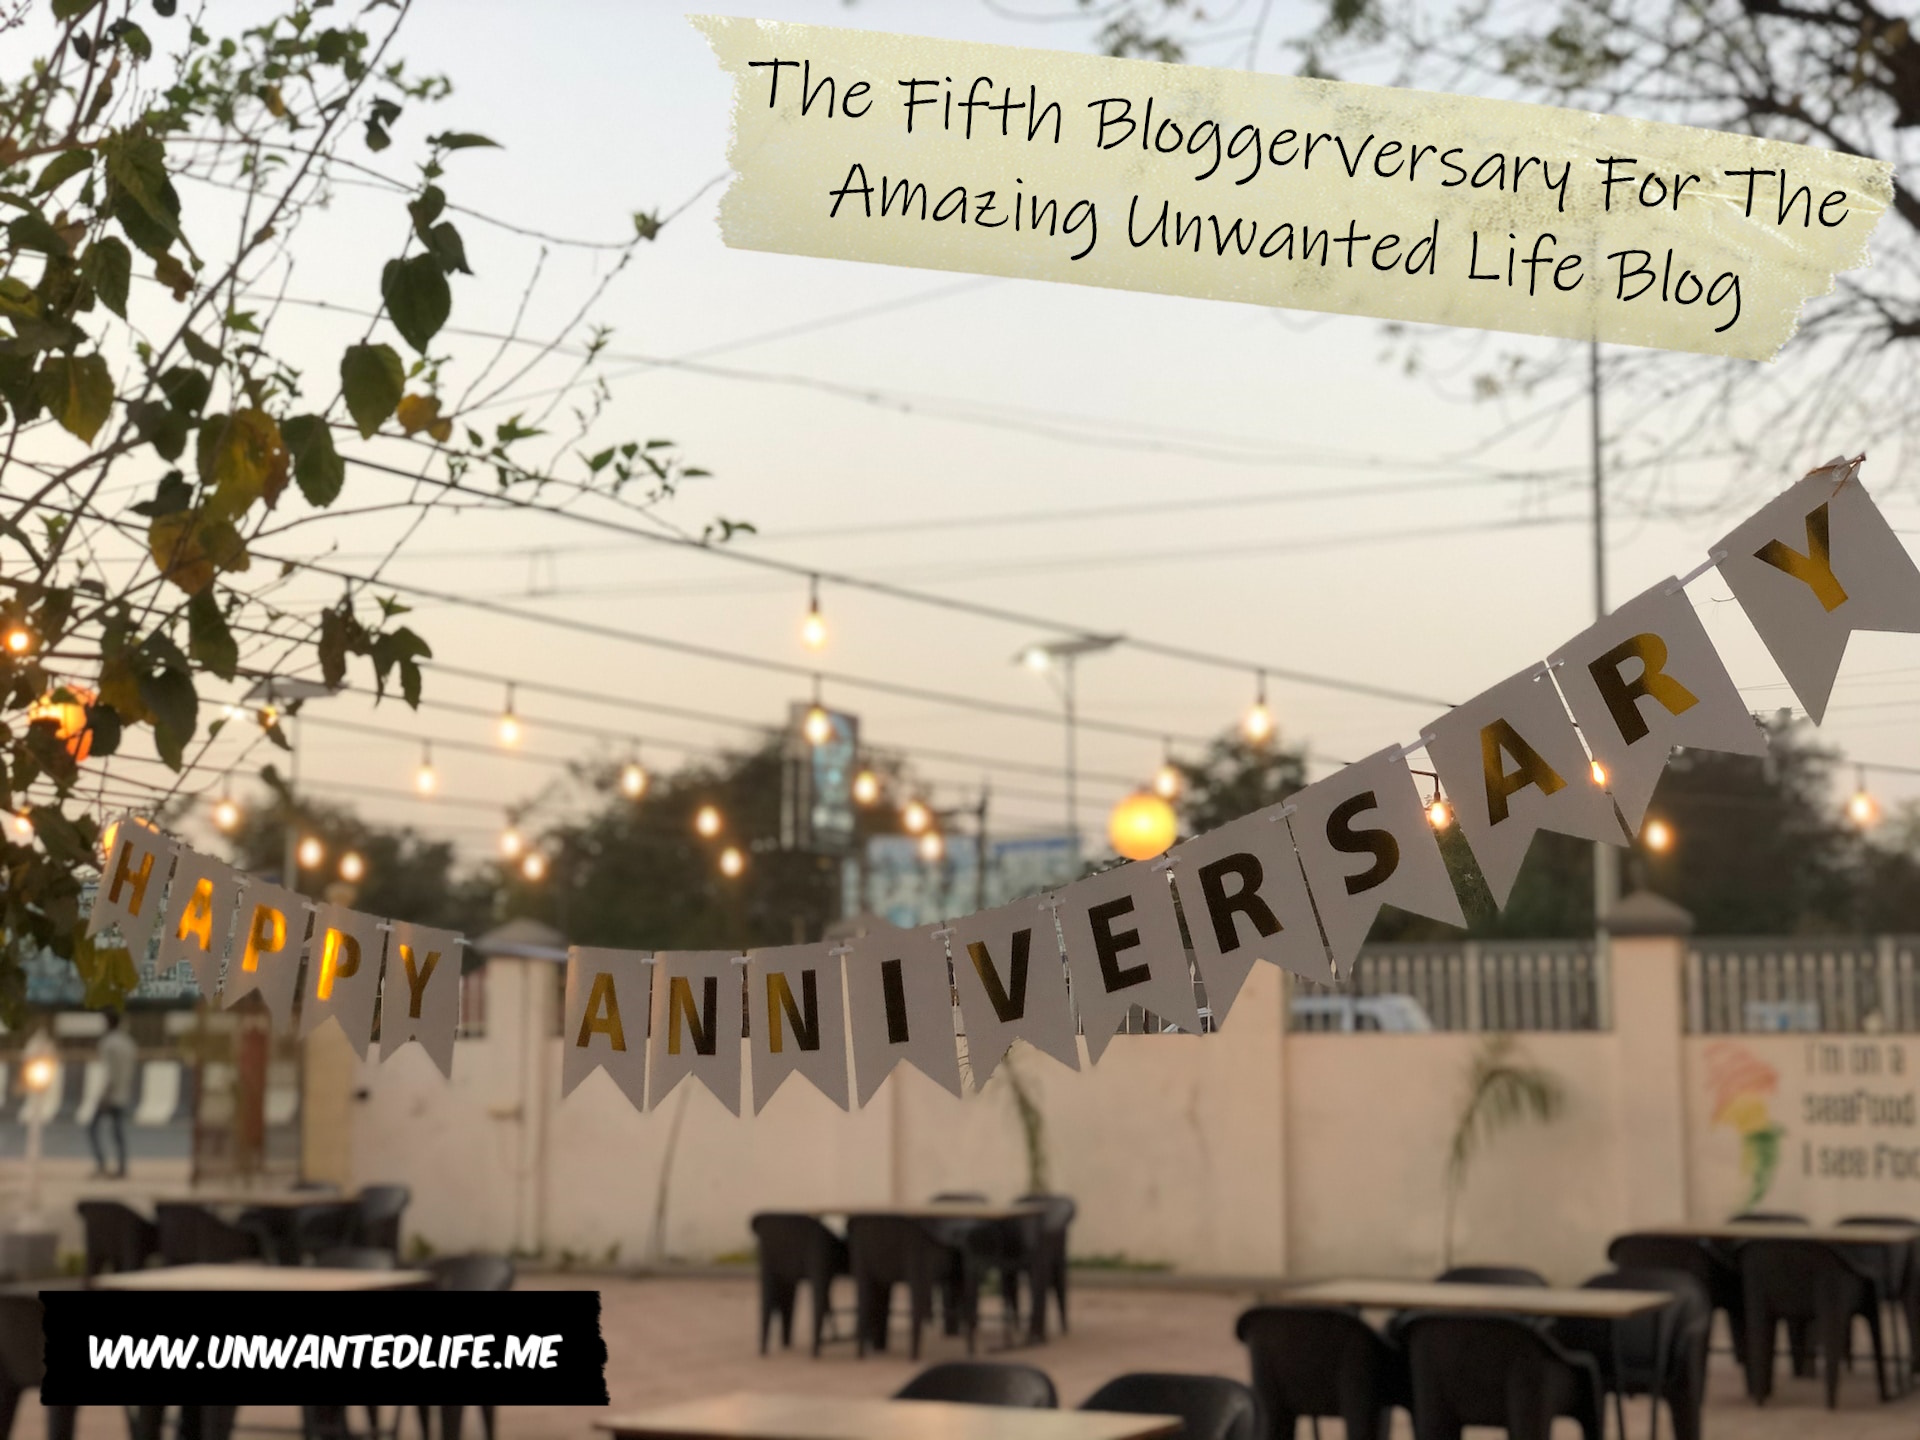 A photo of someone's garden patio set-up to celebrate someone's anniversary, to represent the topic of the article - The Fifth Bloggerversary For The Amazing Unwanted Life Blog